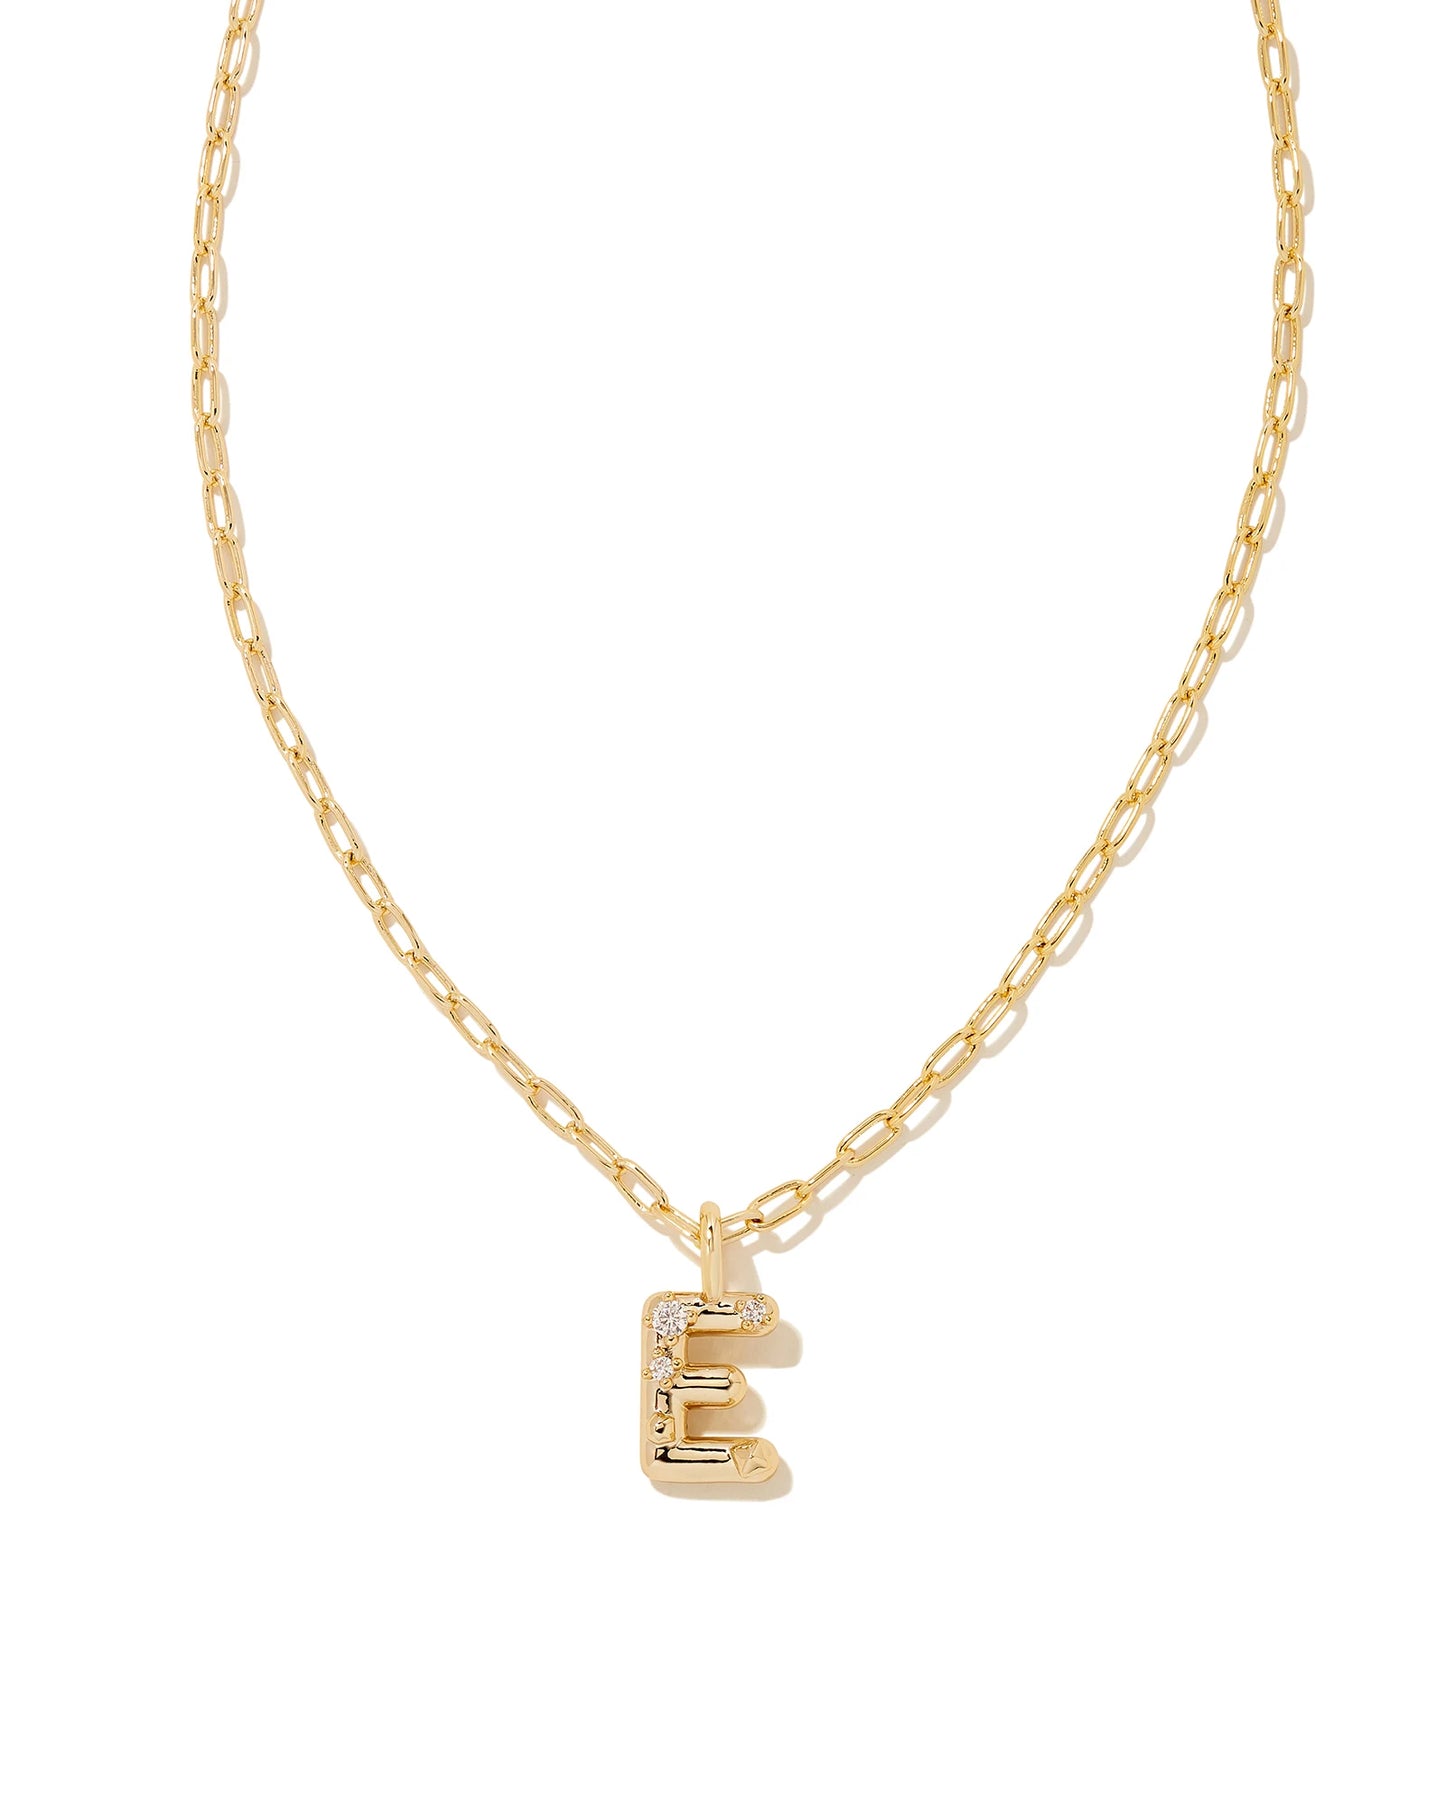 Crystal Letters Gold Short Pendant Necklaces in White Crystal